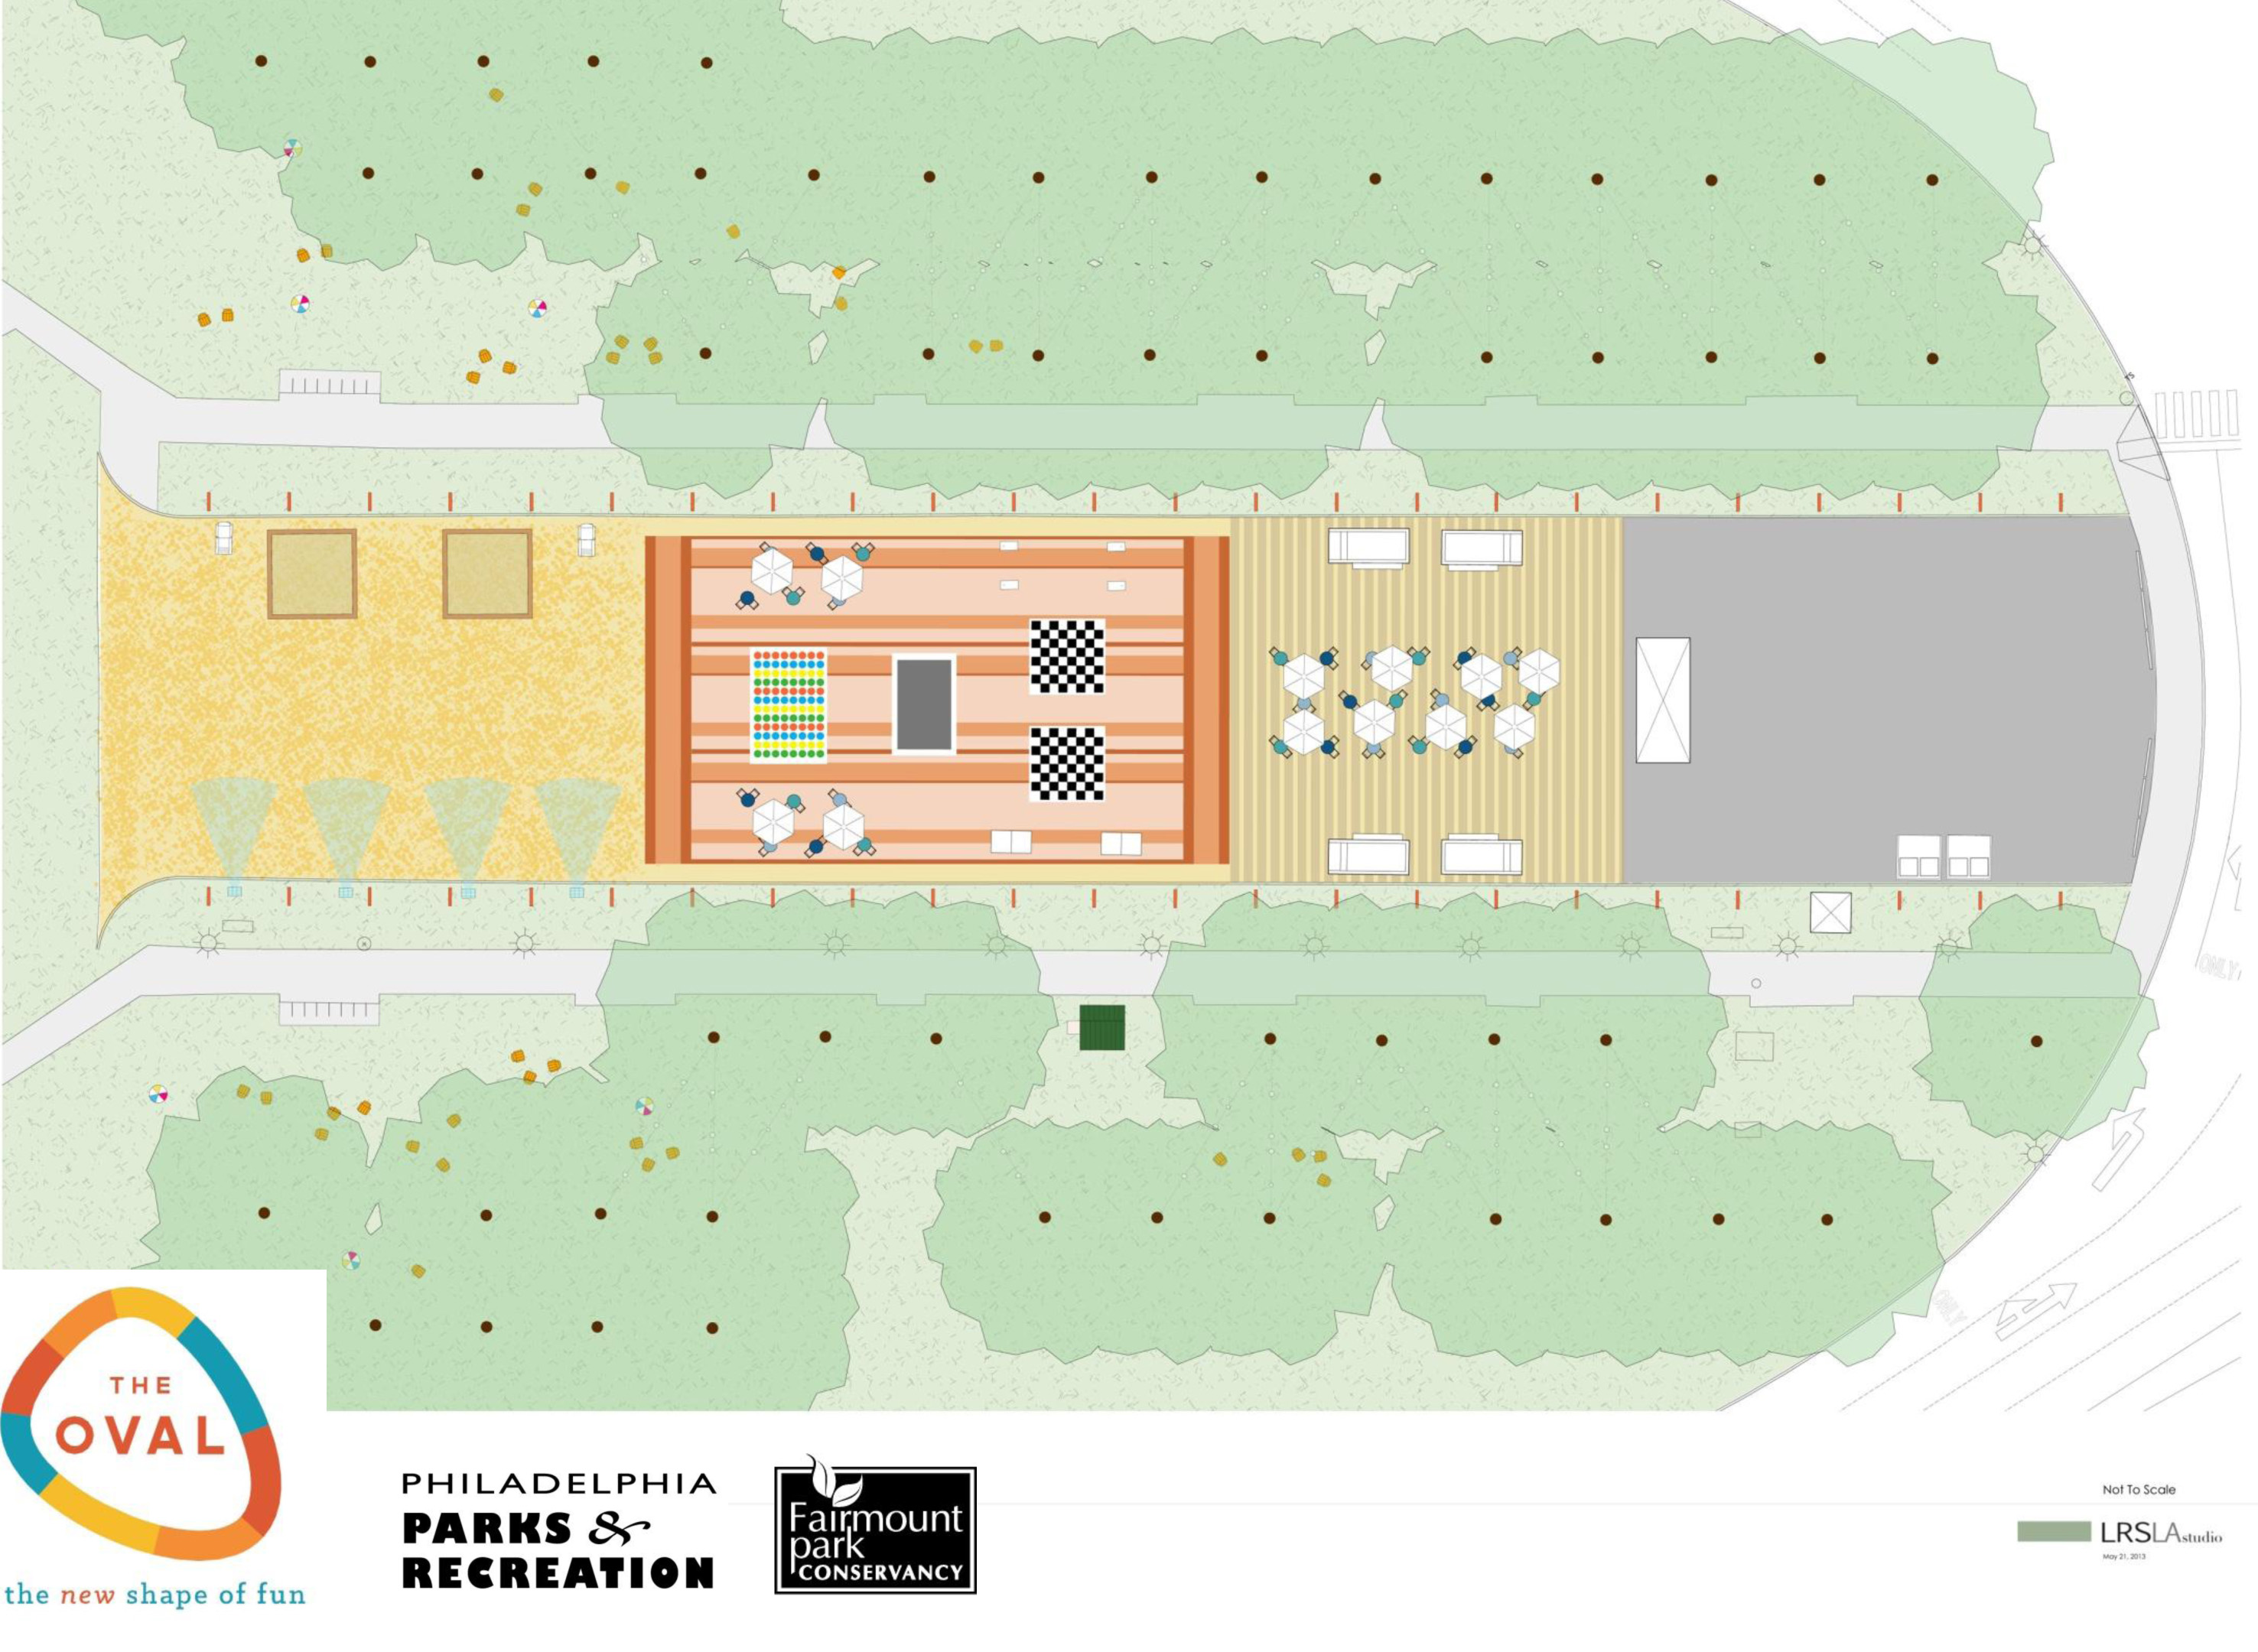 Plan of The Oval: from left to right: The beach, the blanket, and the boardwalk | LRSLA studio